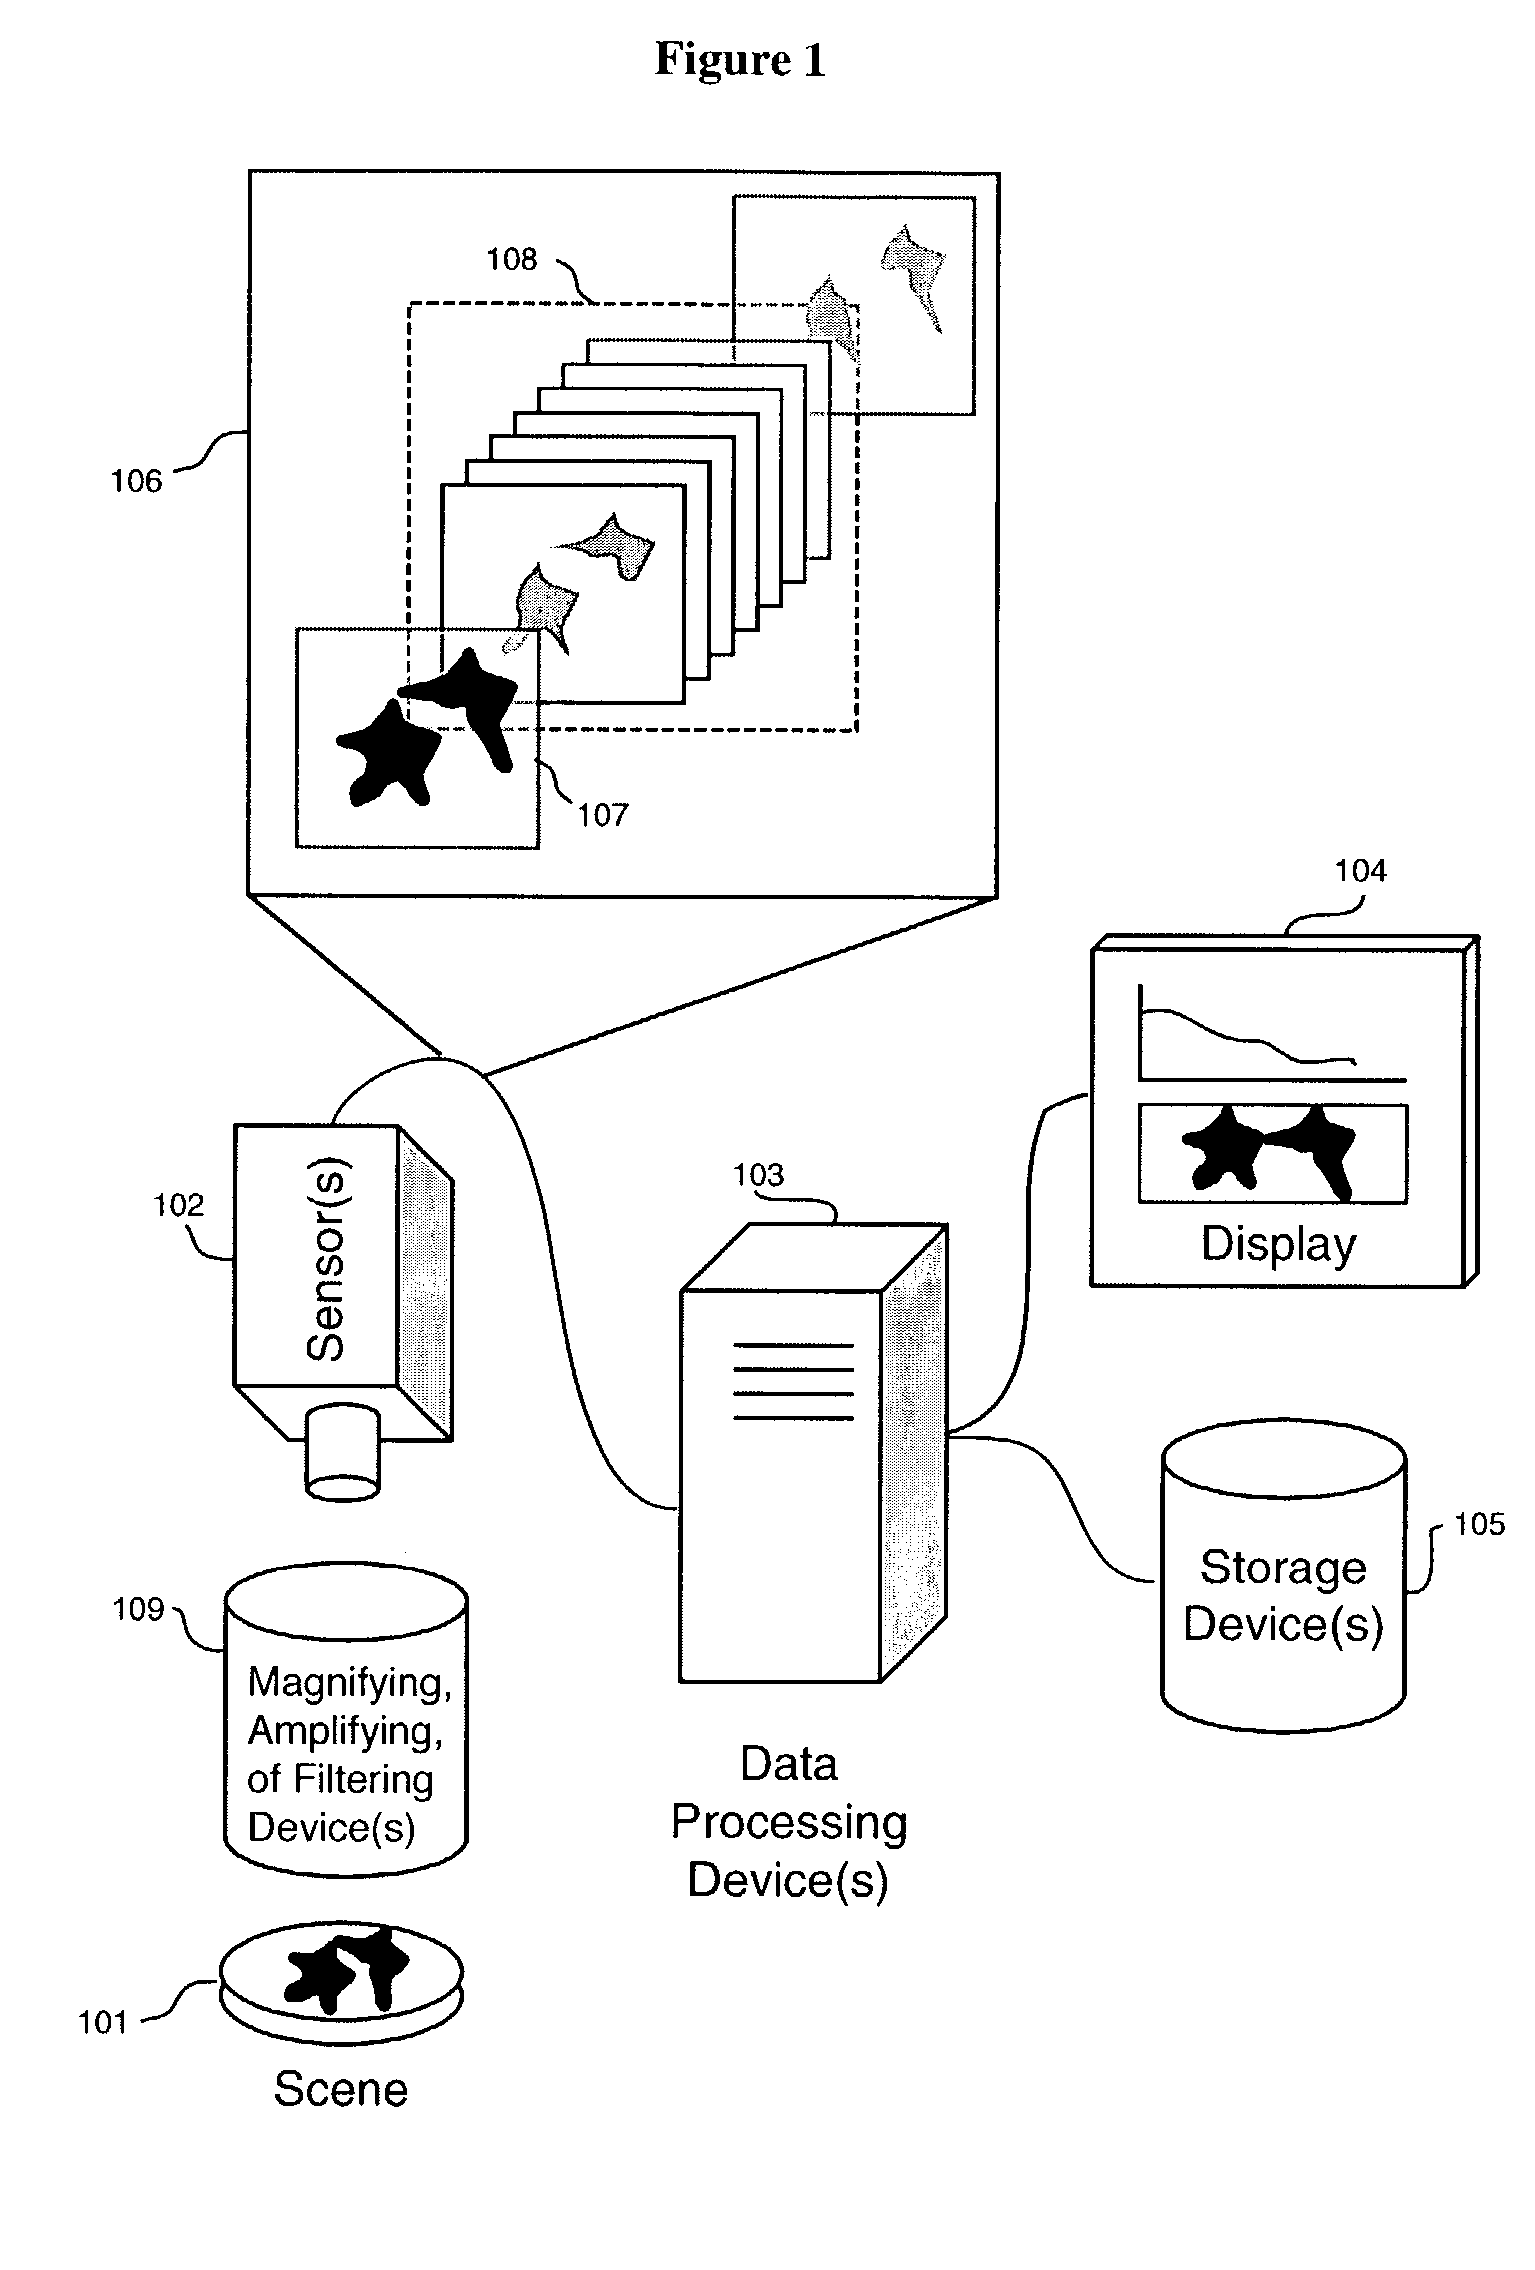 Method and apparatus for acquisition, compression, and characterization of spatiotemporal signals